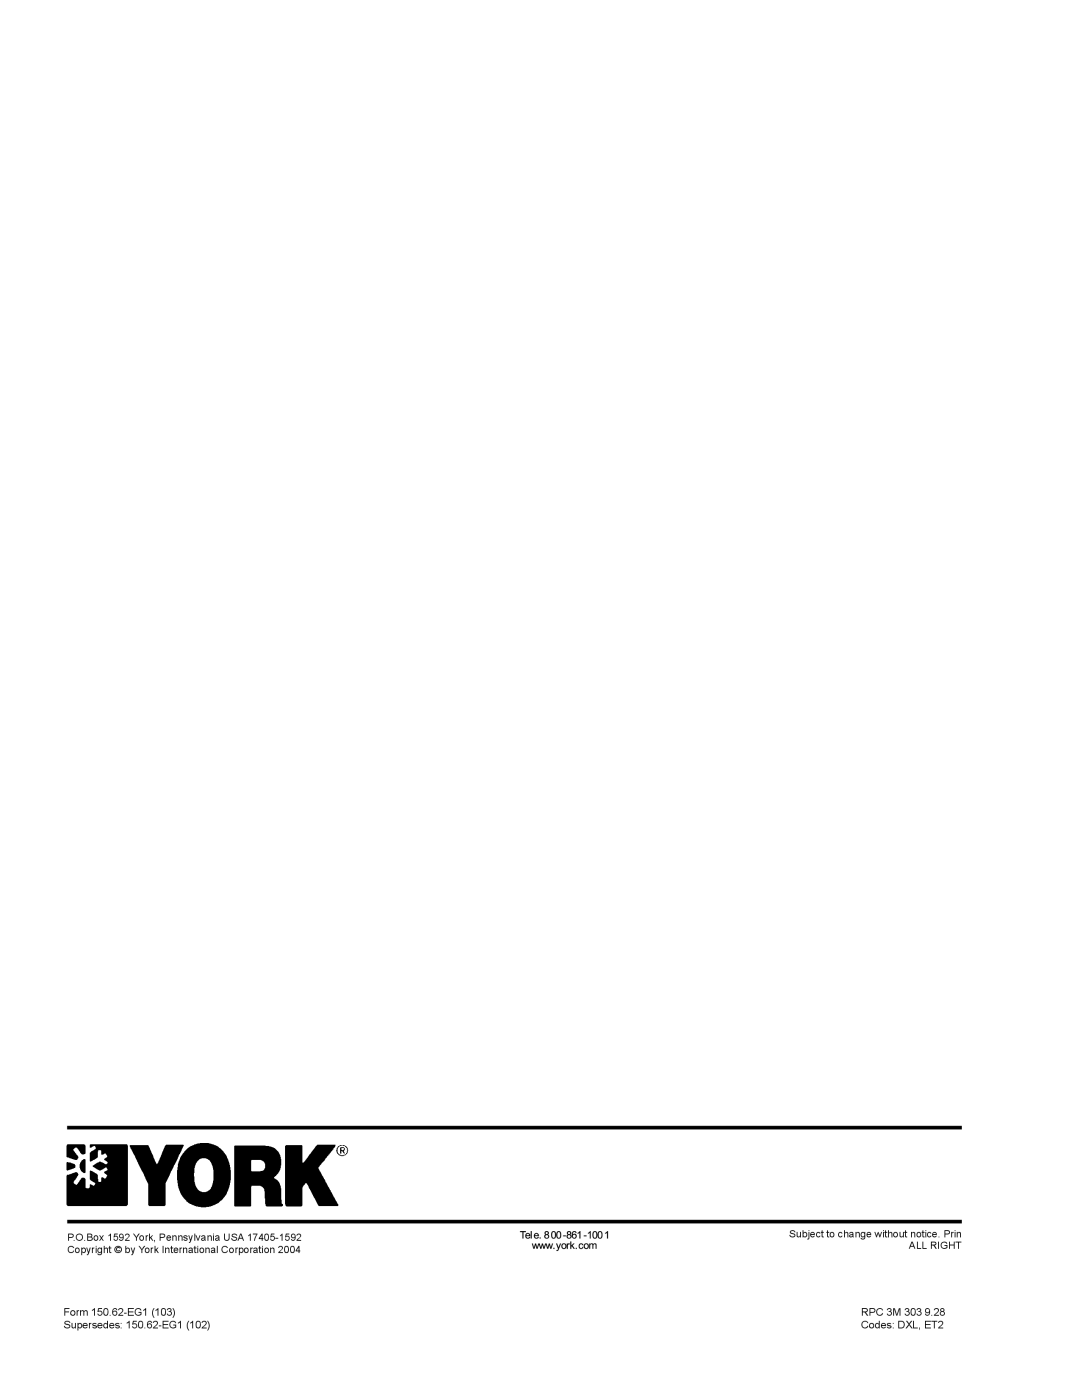 York YCAL0041, YCAL0065 manual Form 150.62-EG1103 Supersedes 150.62-EG1102, Subject to change without notice. Prin ALL RIGHT 